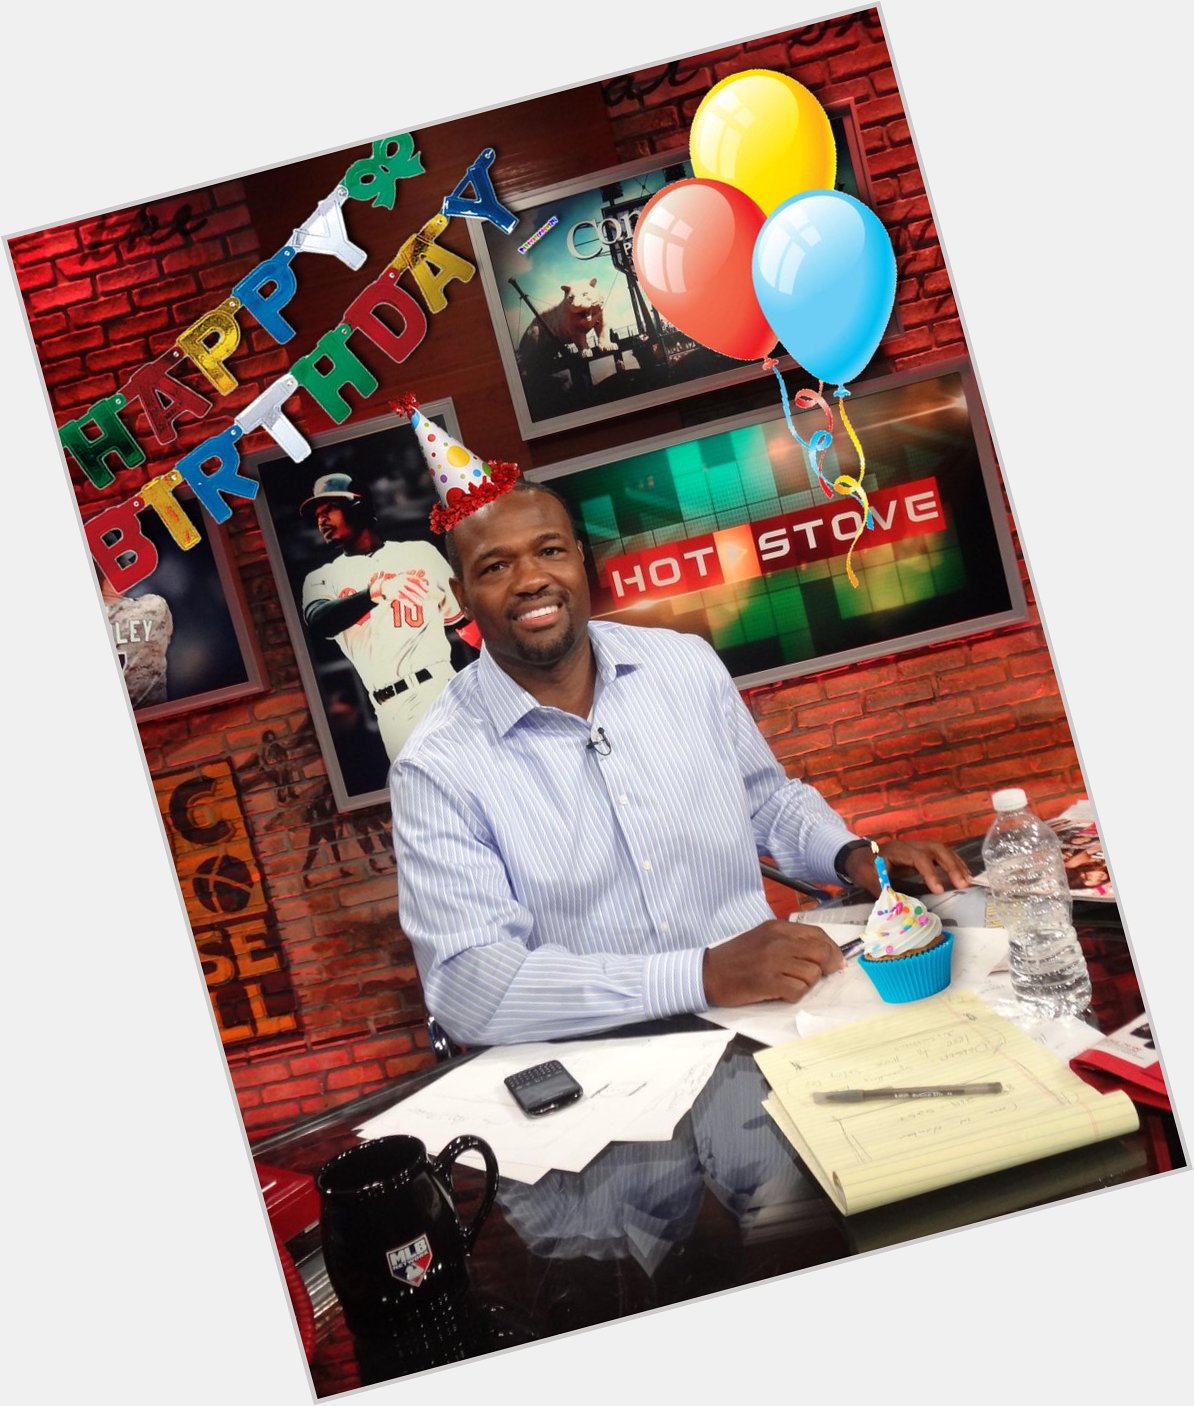 Happy Birthday, H! REmessage to wish own Harold Reynolds a very HBD! 